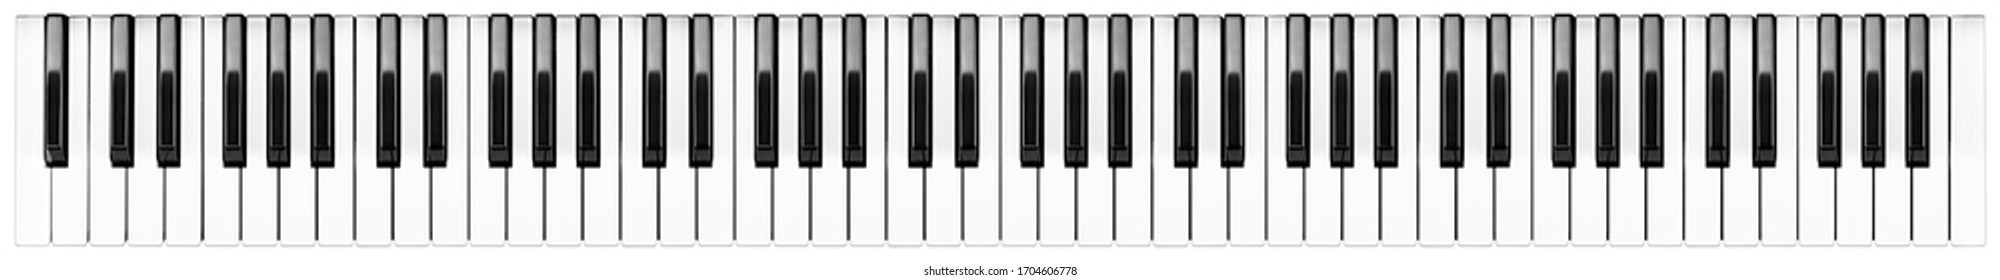 Full grand piano 88 black white keys keyboard layout isolated on white wide panorama banner background. classical music symphony orchestra music instrument concept